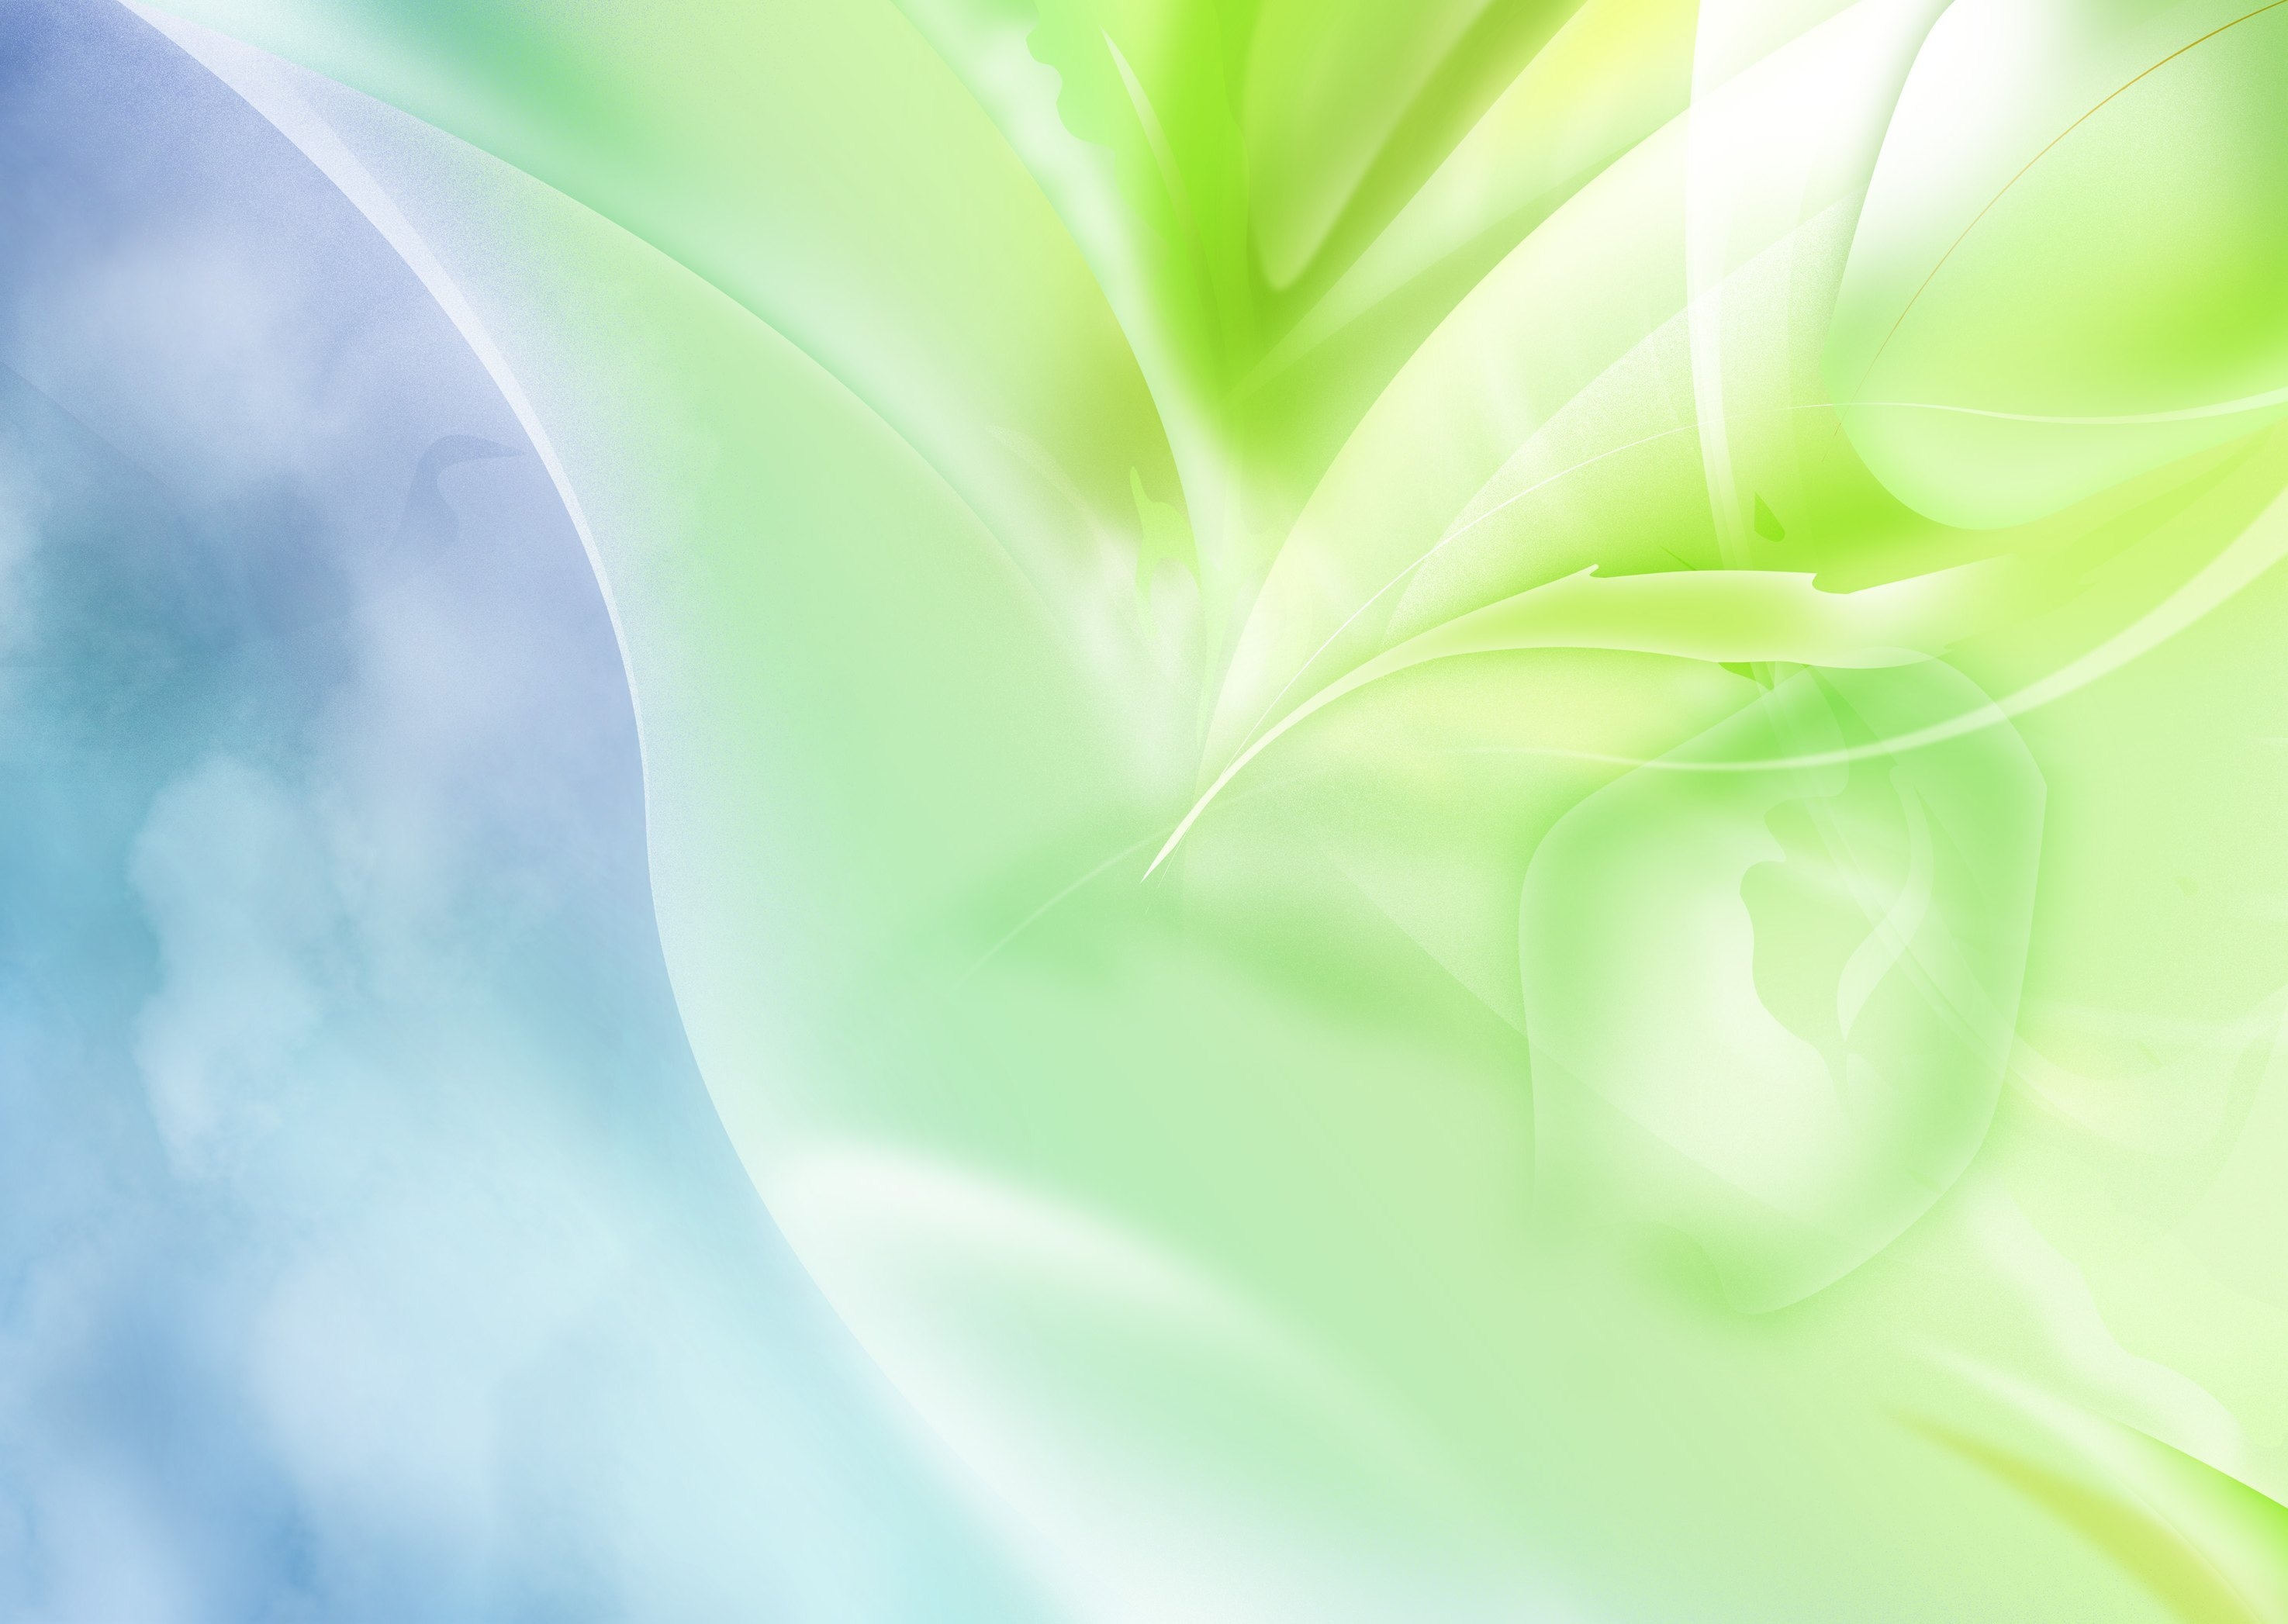 156129 download wallpaper light coloured, abstract, white, green, light, lines screensavers and pictures for free